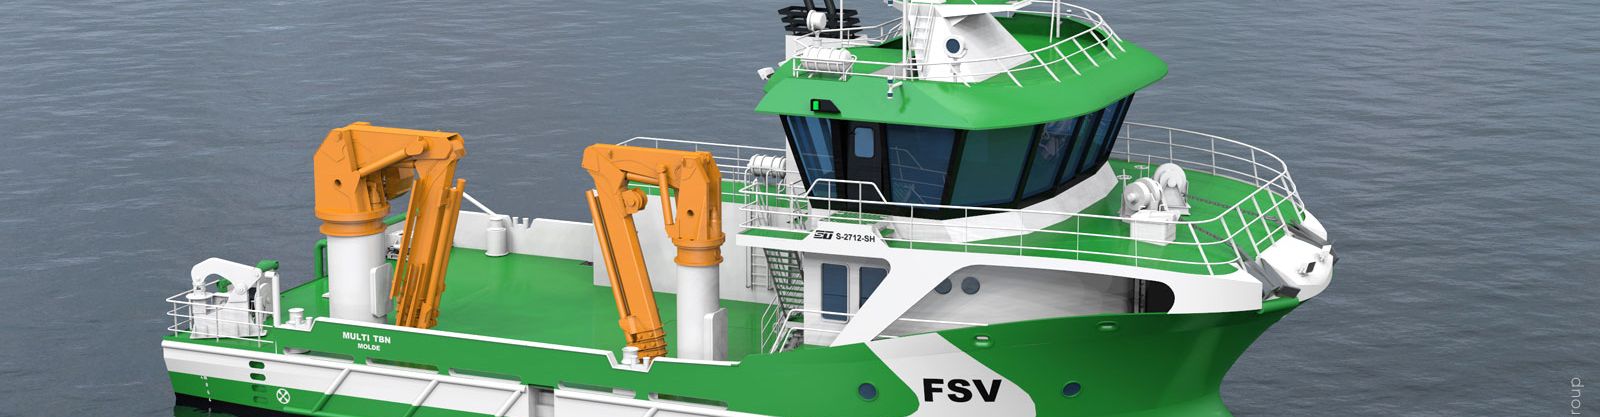 Exciting news! We have been chosen by the Bolle shipyard in Derben to provide battery systems for a series of five new traffic safety vessels.